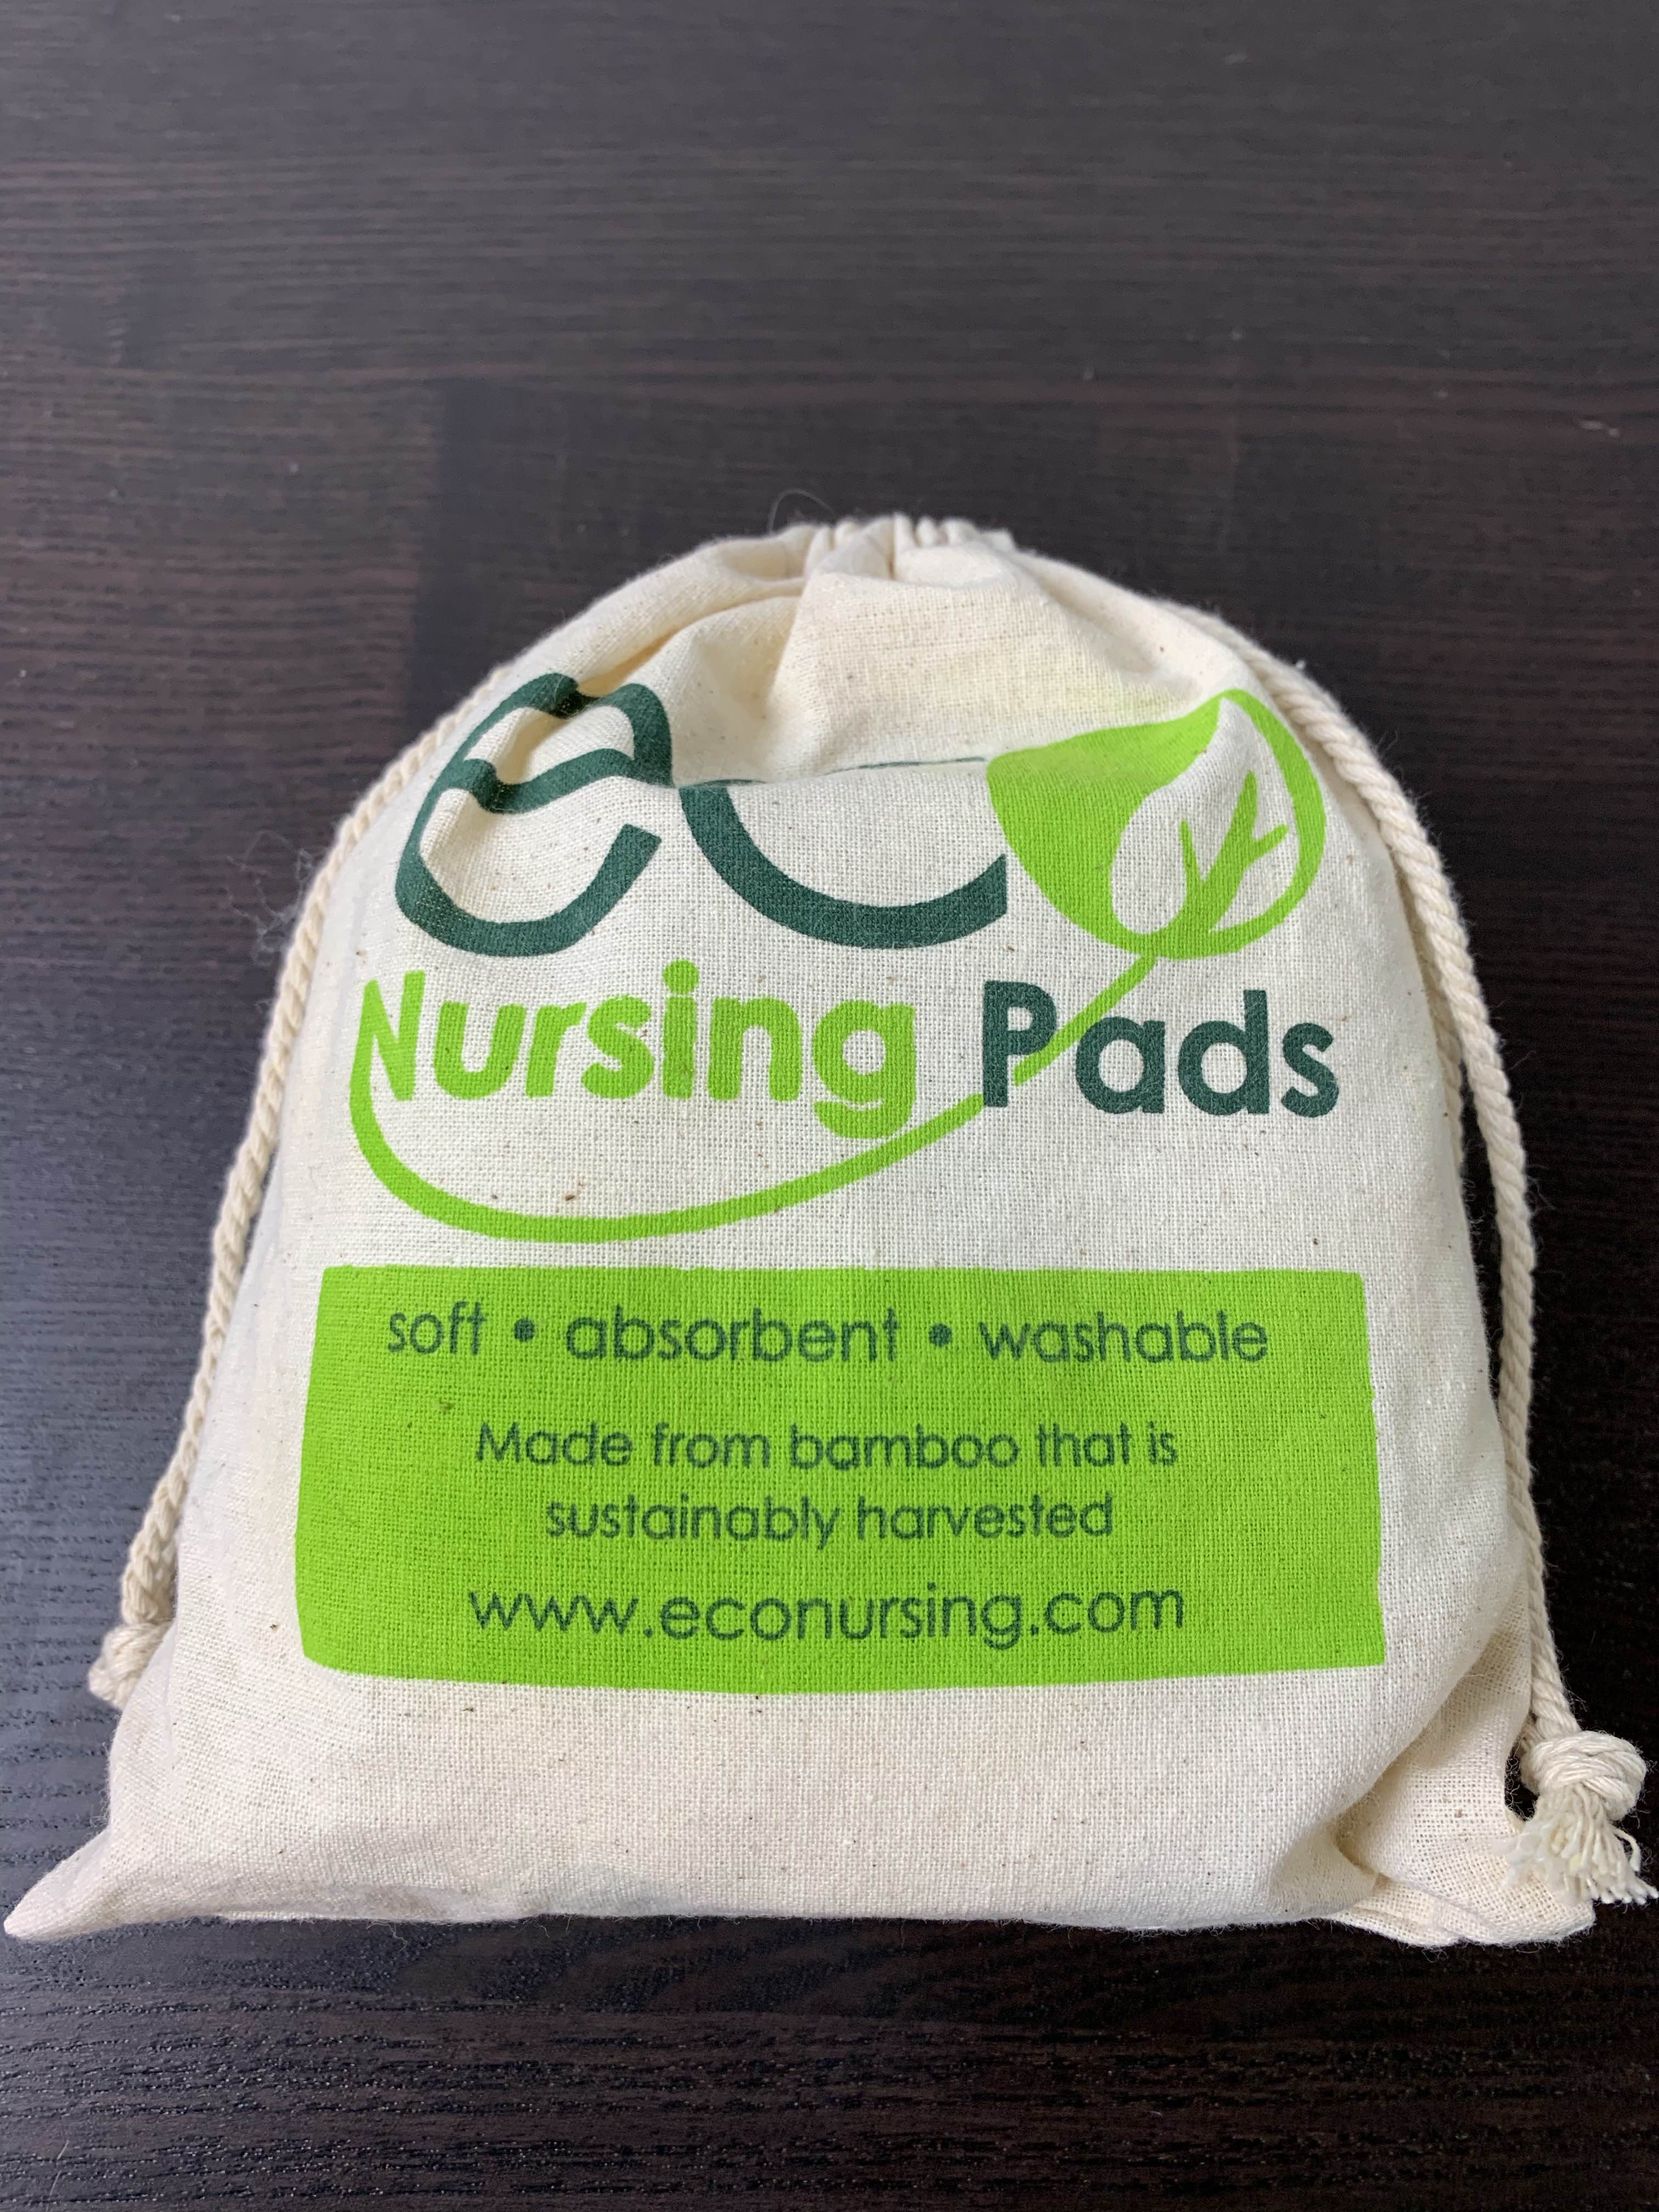  Washable Reusable Bamboo Nursing Pads, Organic Bamboo Breastfeeding  Pads, 4 Flower Pads, 10 Pack with 2 Pouches & E-Book : Baby